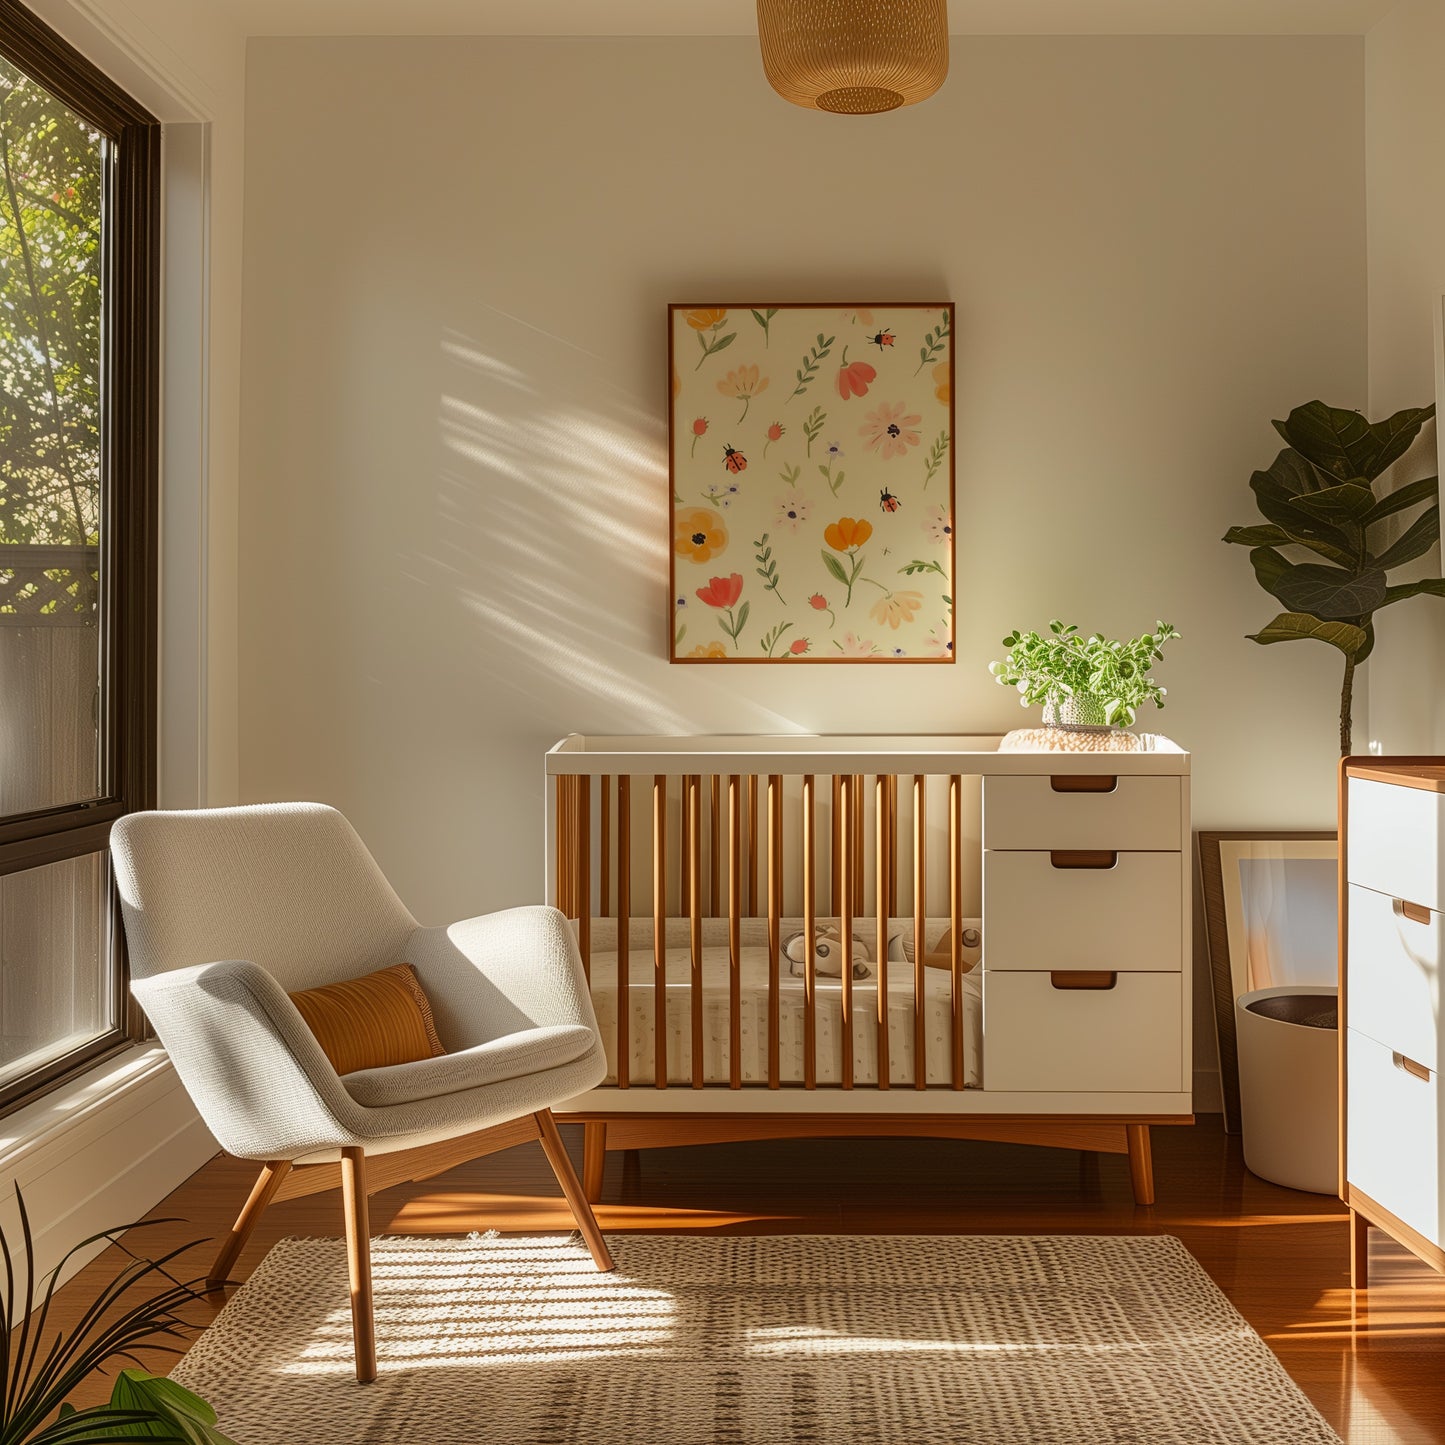 A cozy nursery room with a crib, armchair, and plant under natural light.